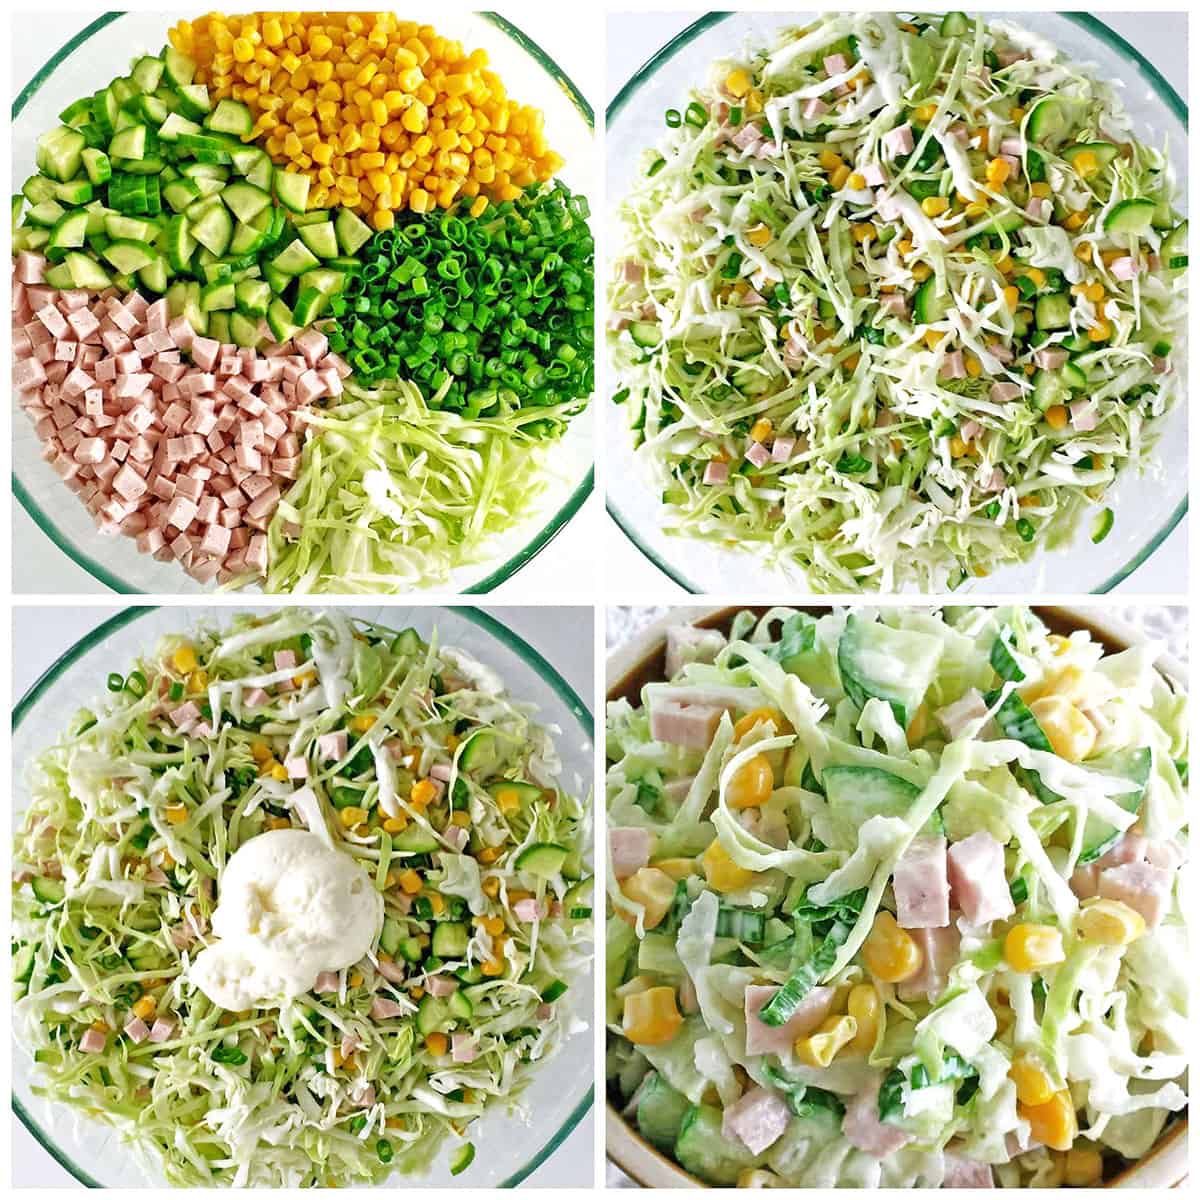 A tossed salad is simply a mixture of salad greens and veggies tossed together with a salad dressing for a simple salad that's packed with flavor and nutrients!